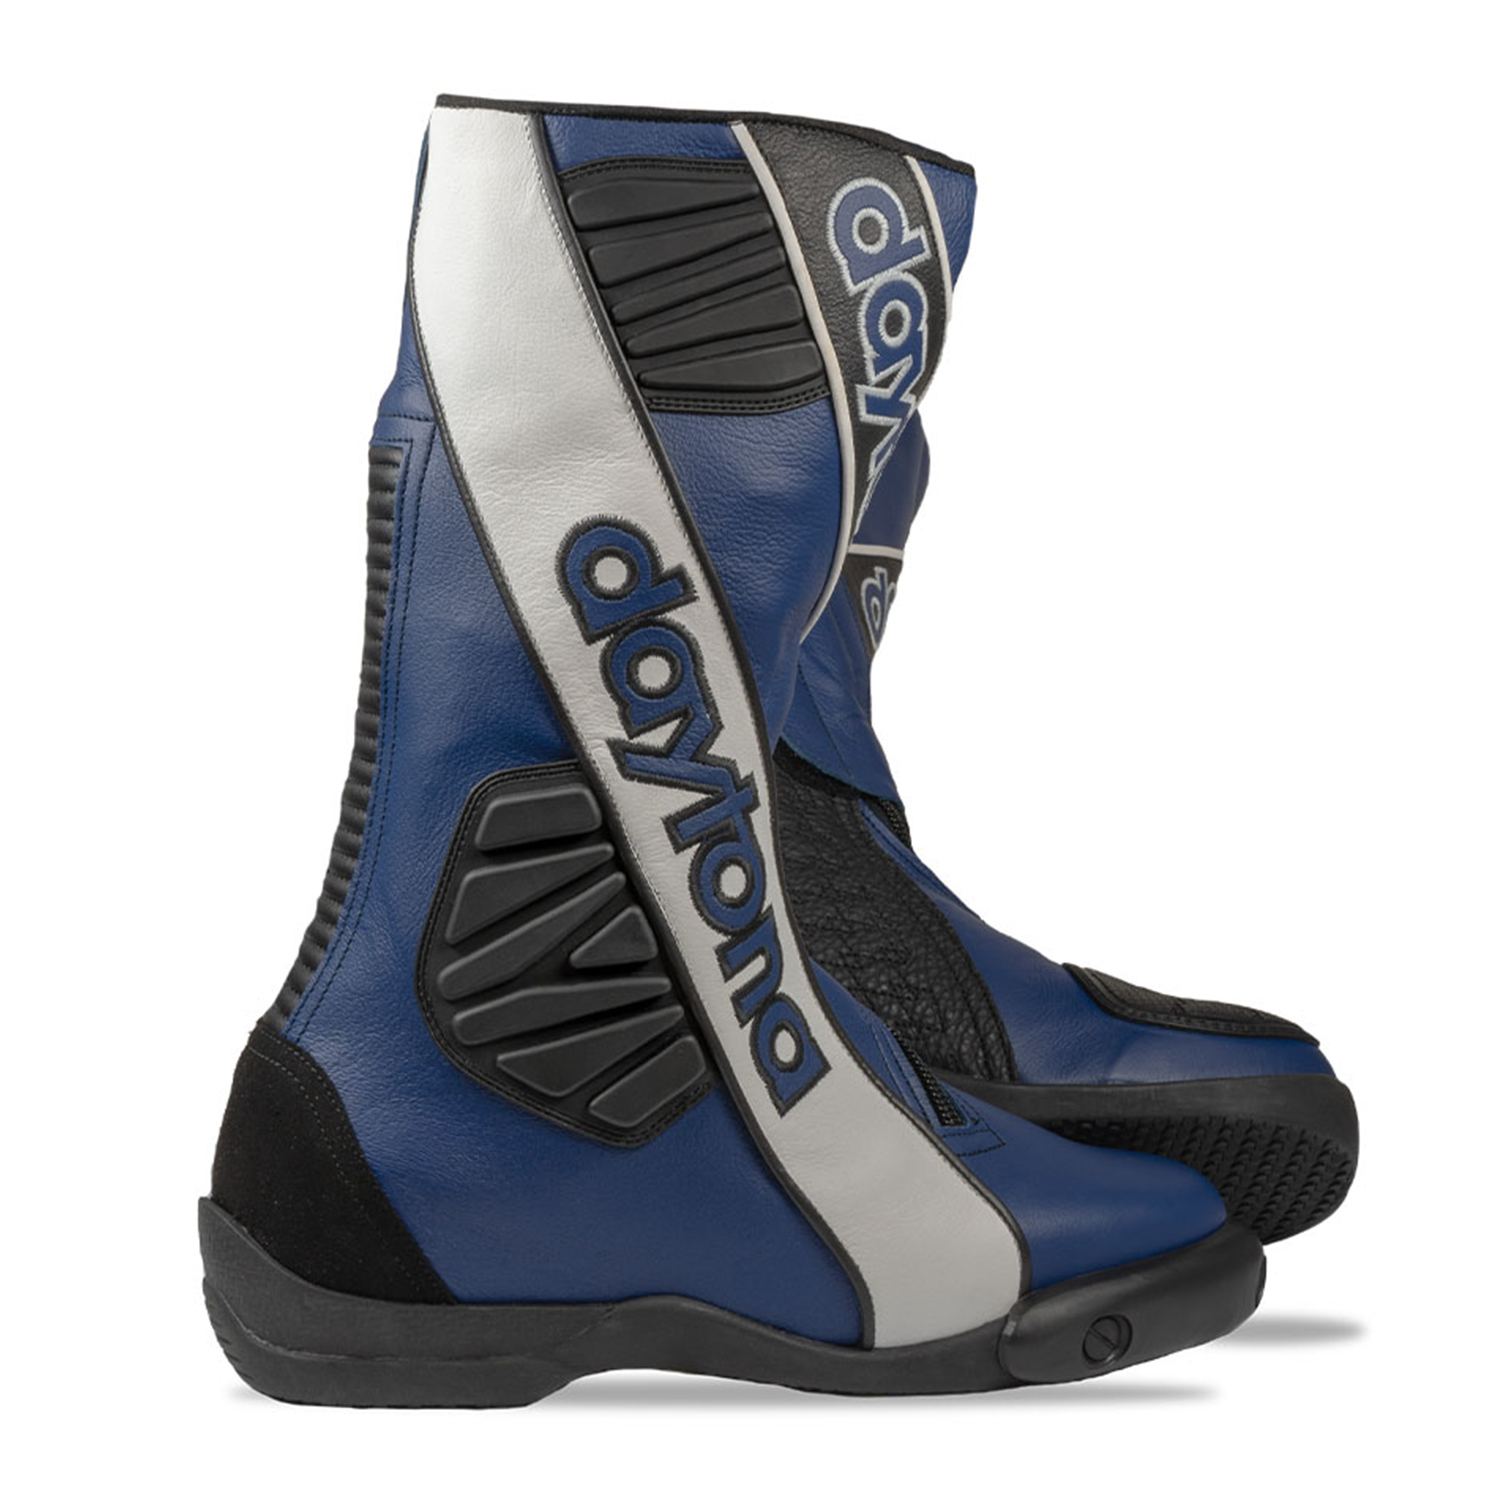 Daytona Security EVO G3 Boots Blue-White-Black - Available in Various Sizes